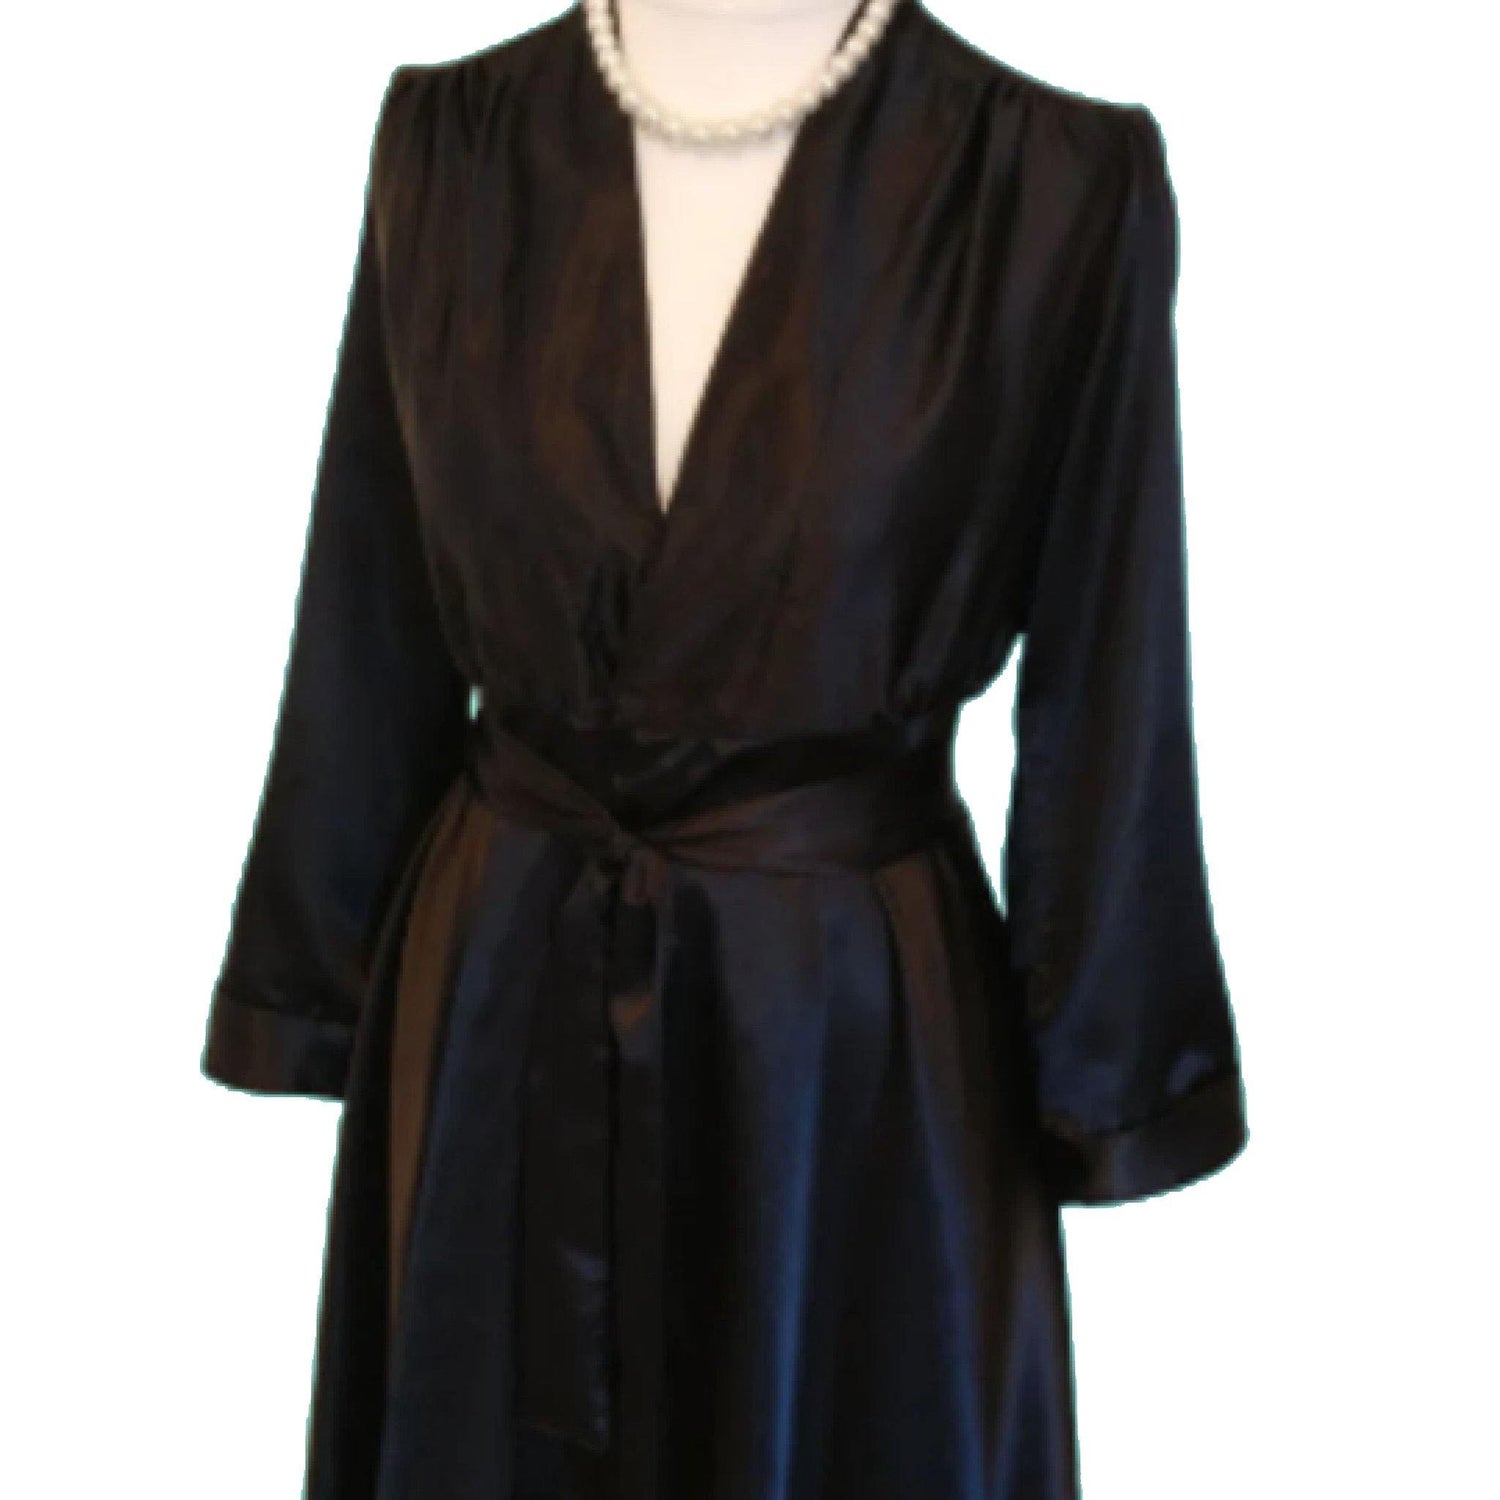 Vintage 1940s Pattern, Women's Wrap ’Donna’ Housecoat, Dressing Gown in black